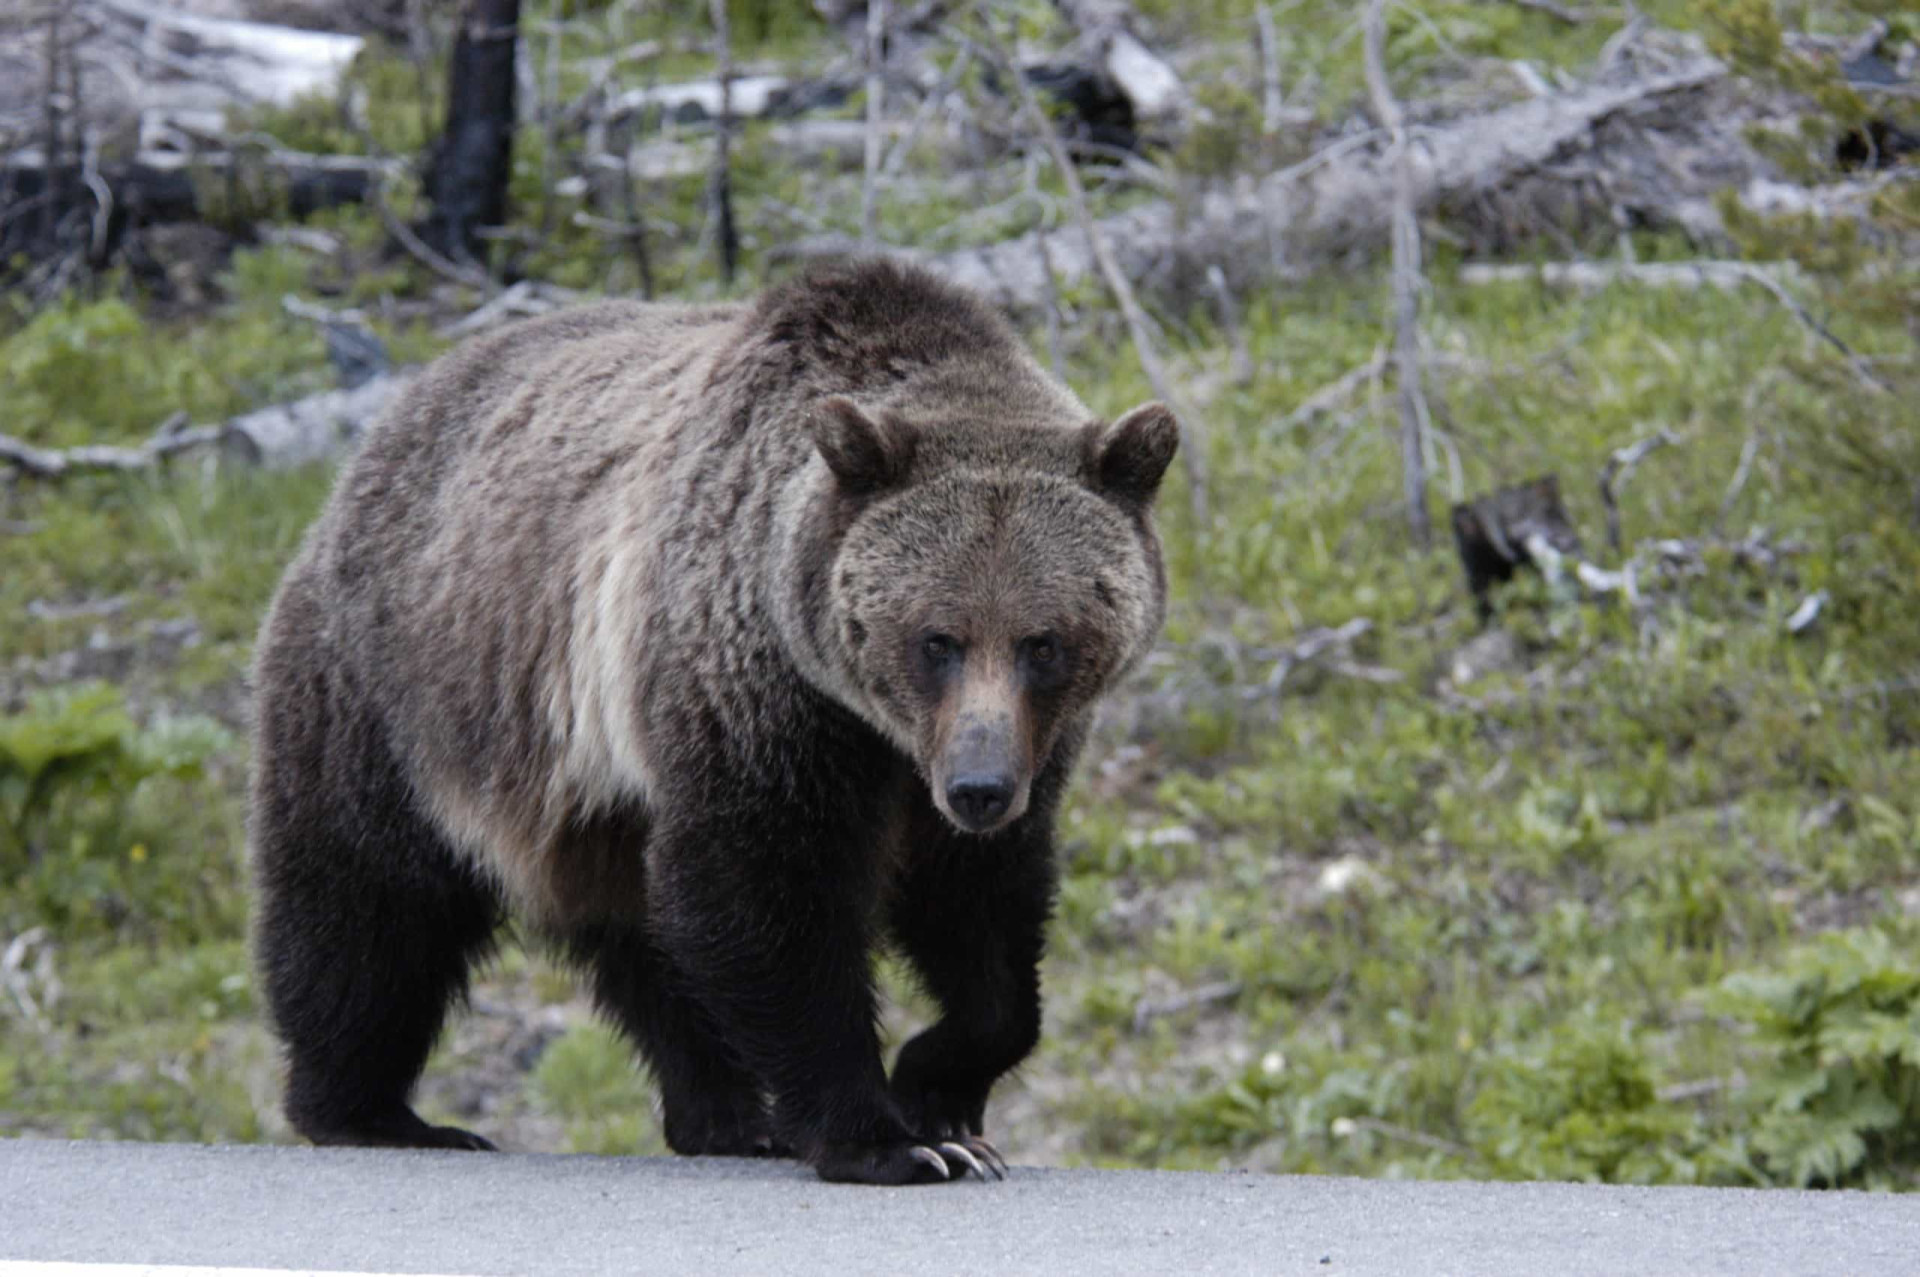 <p>If you’re visiting a national park or other area where wildlife are a threat, keep your dog safe. Your pooch wouldn’t stand a chance against a bear, for instance.</p><p><a href="https://www.msn.com/en-us/community/channel/vid-7xx8mnucu55yw63we9va2gwr7uihbxwc68fxqp25x6tg4ftibpra?cvid=94631541bc0f4f89bfd59158d696ad7e">Follow us and access great exclusive content every day</a></p>